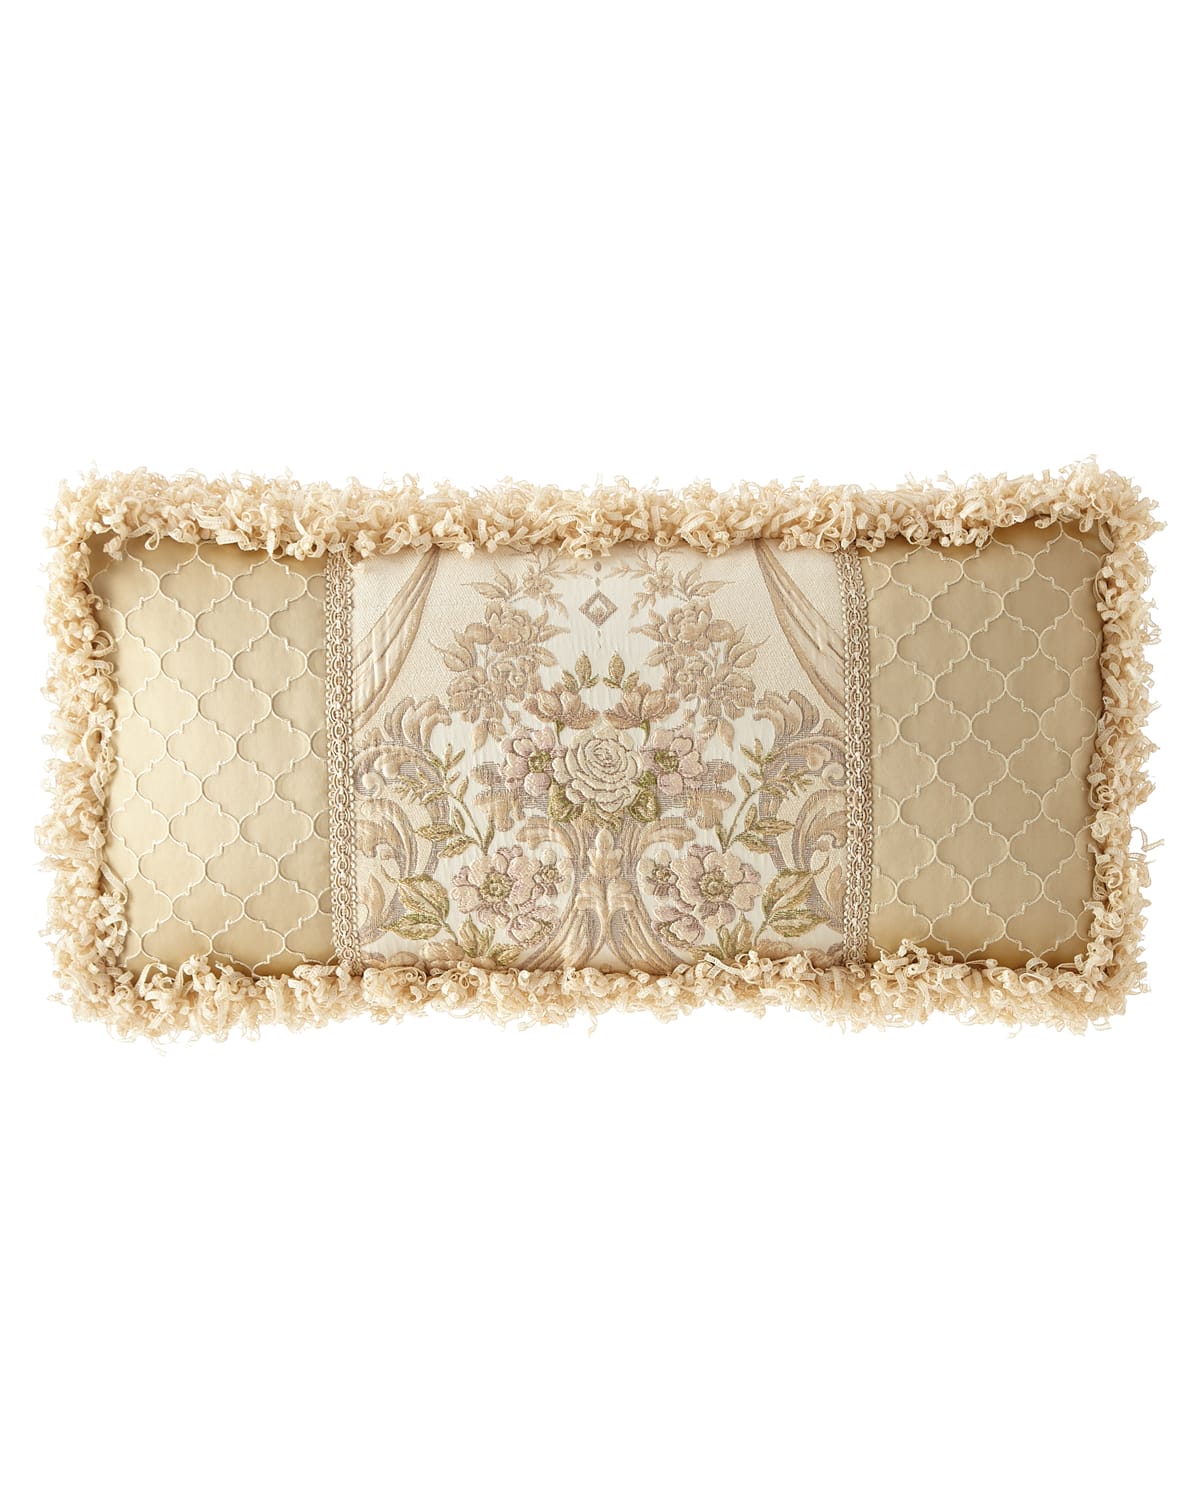 Image Dian Austin Couture Home Mayorka Boxed Oblong Pillow